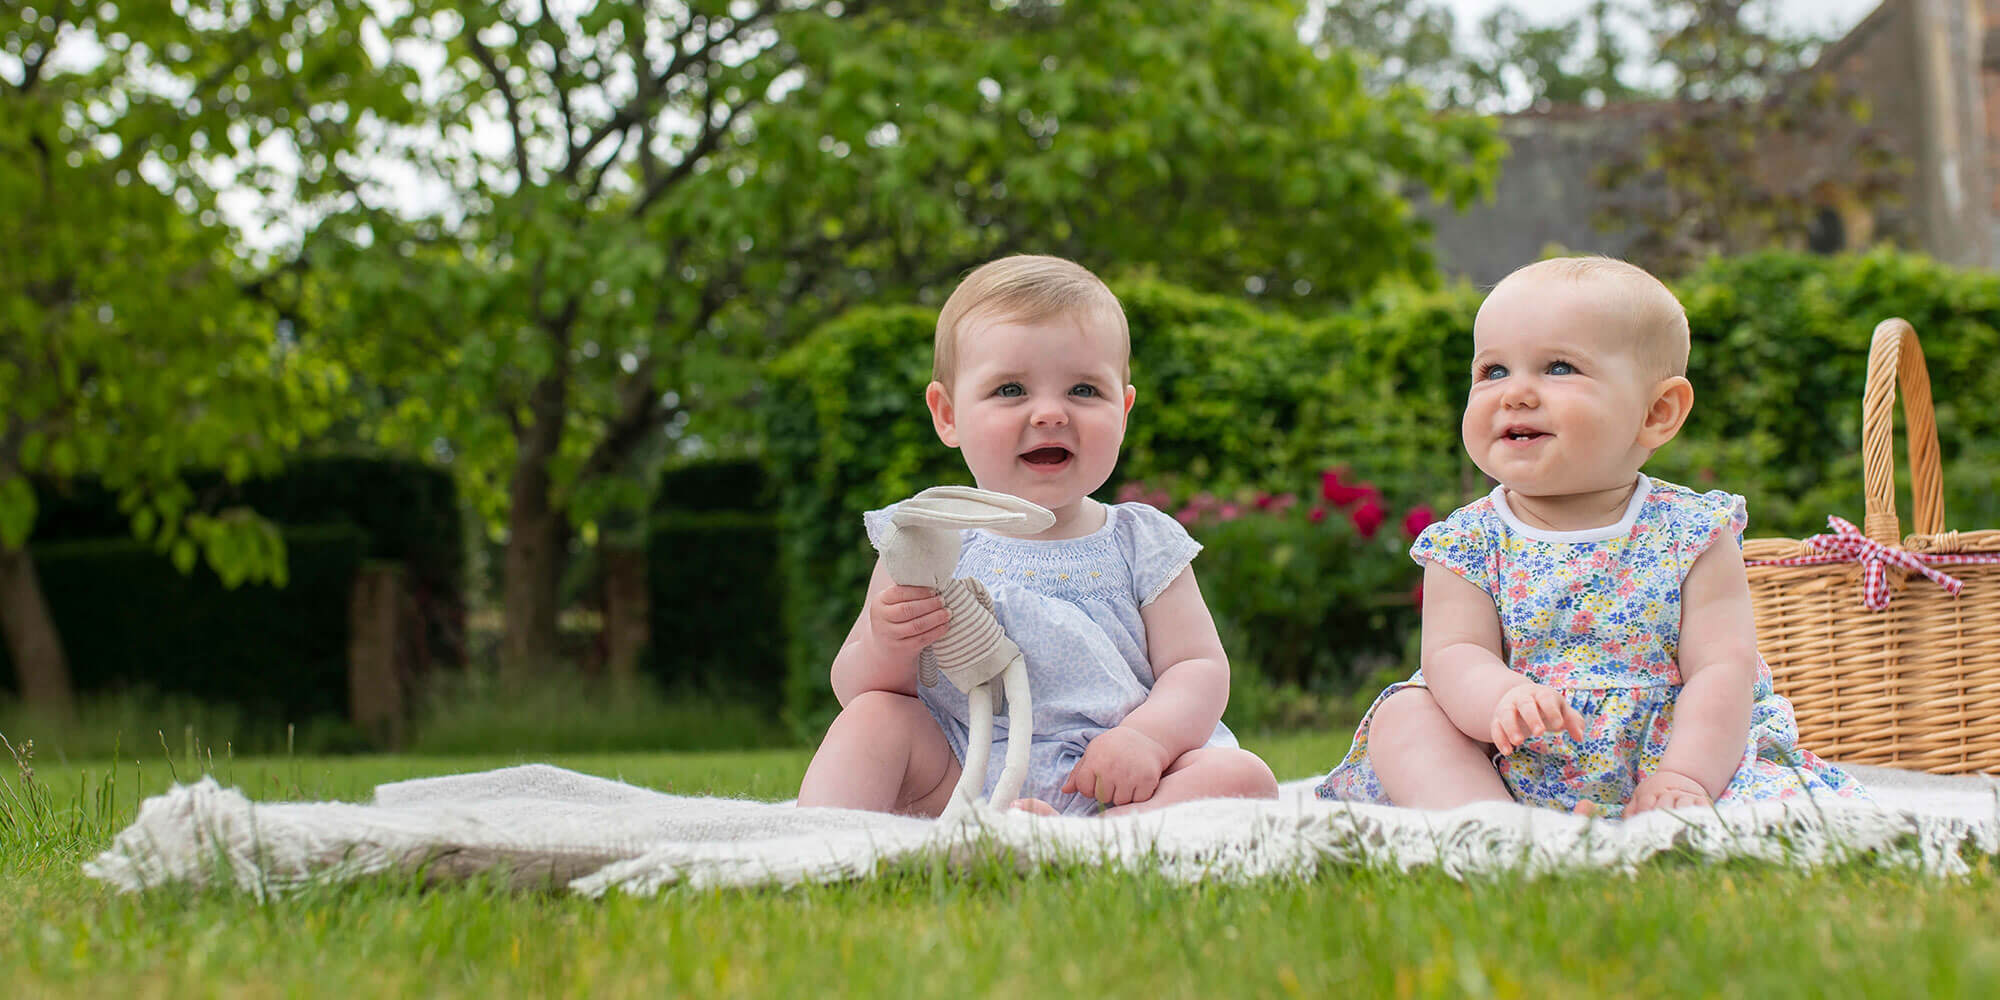 Twins sat on a picnic blanket in the garden